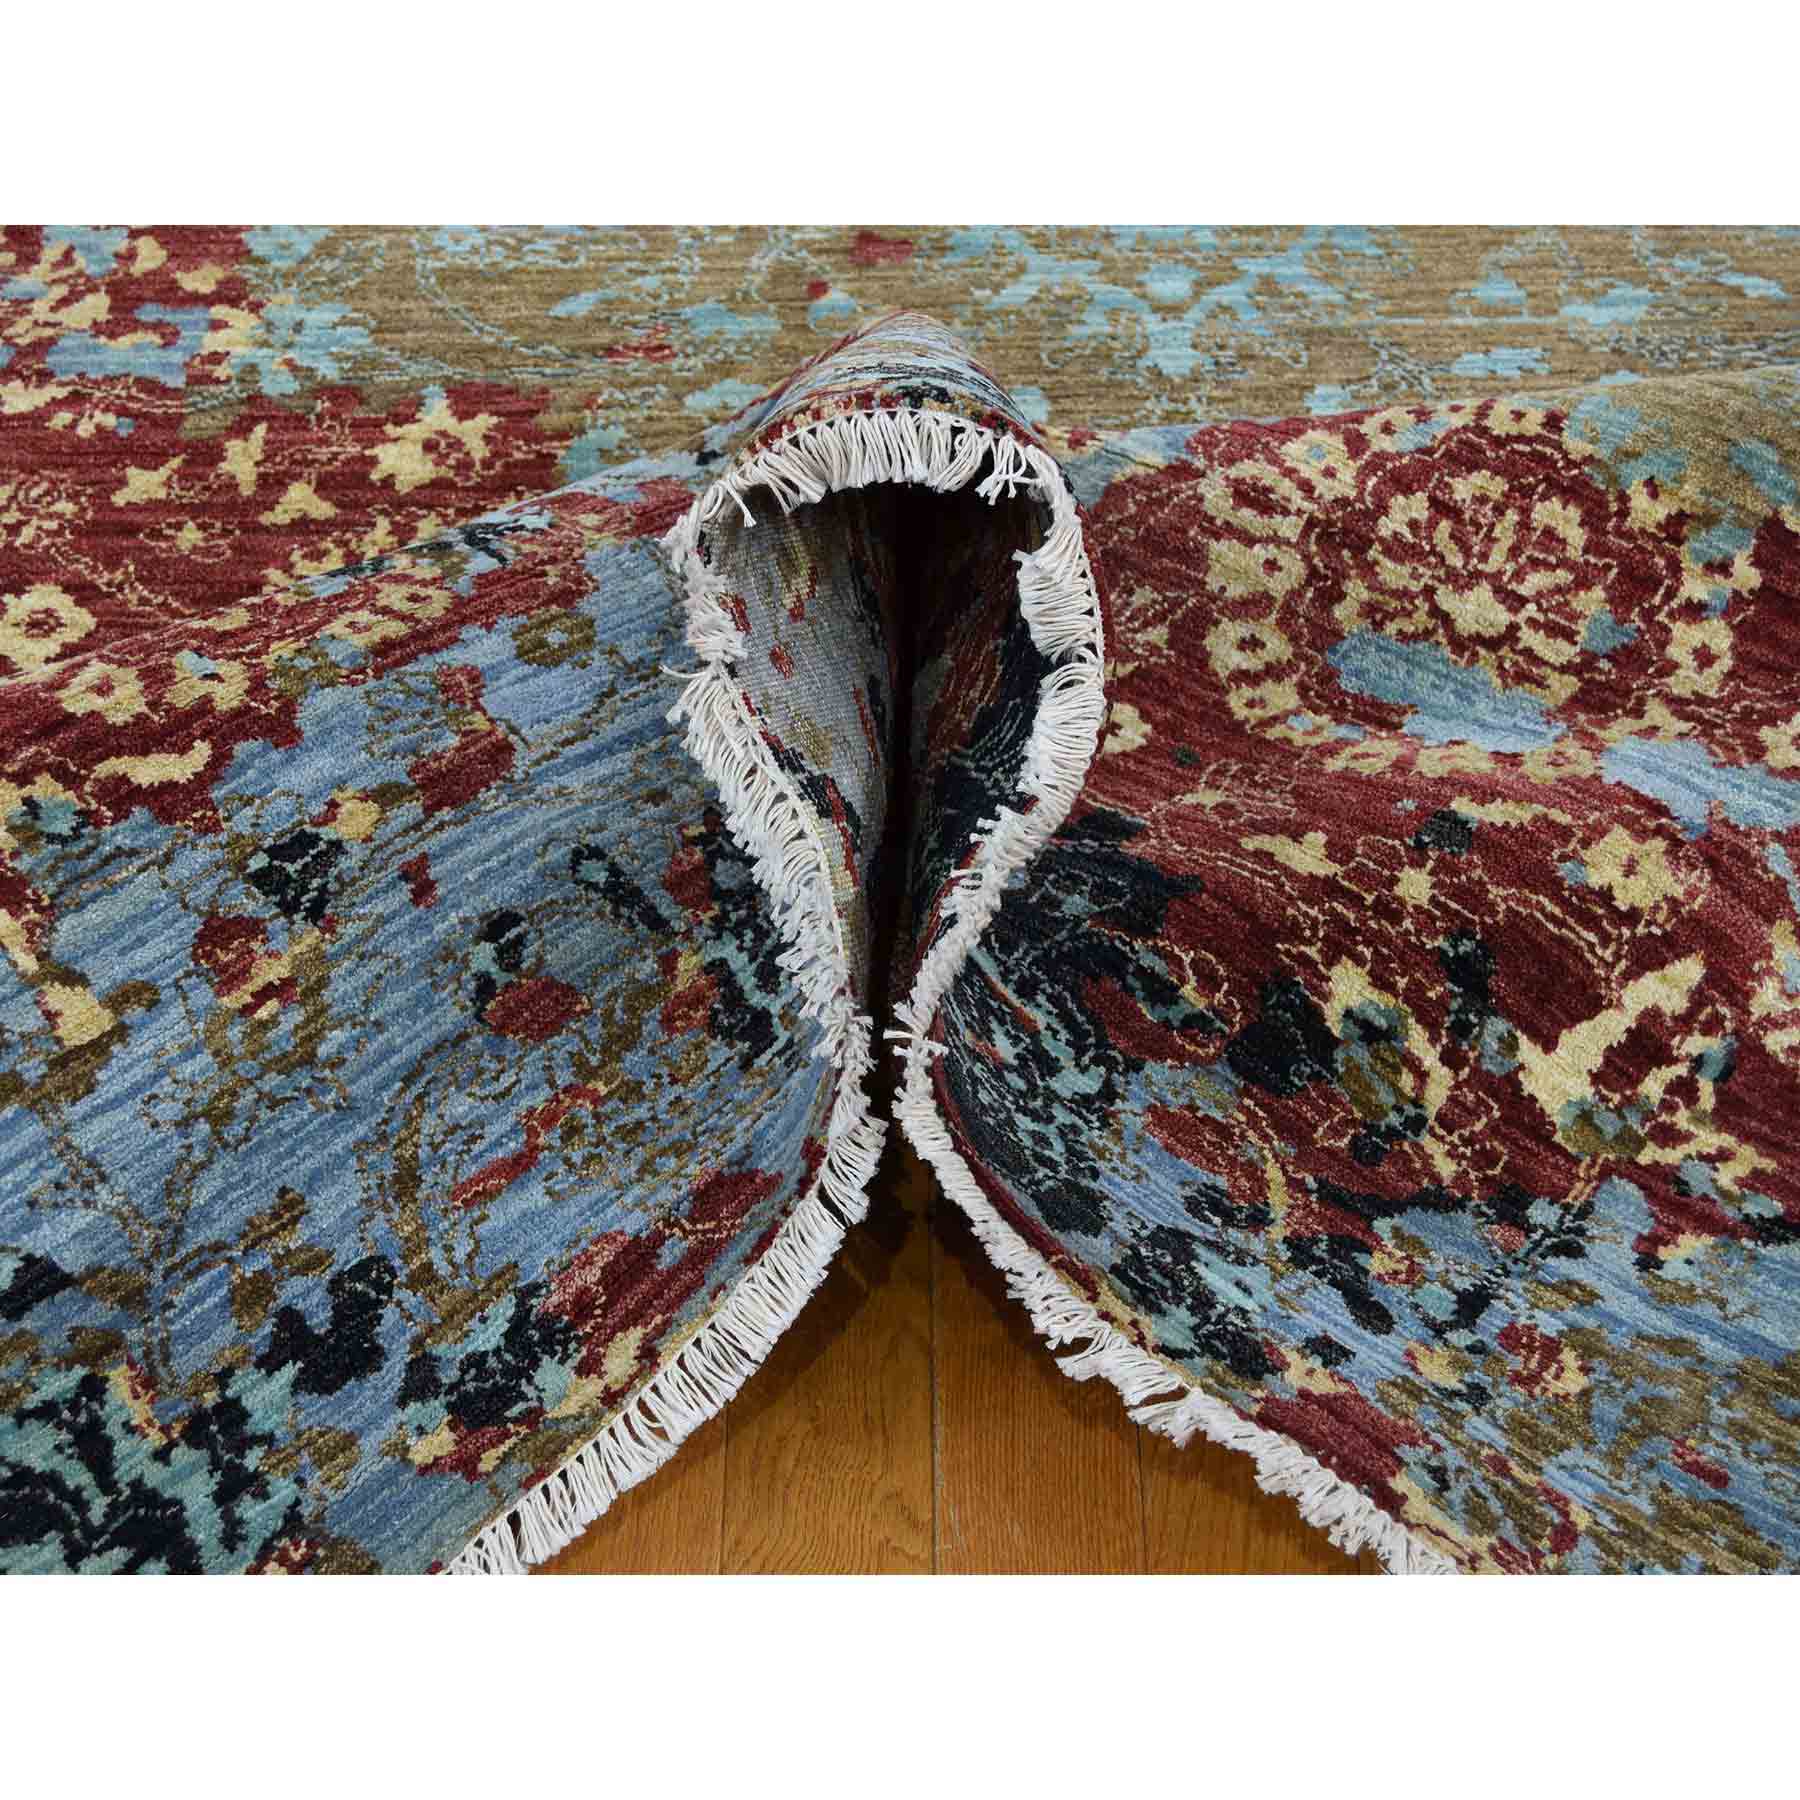 Transitional-Hand-Knotted-Rug-206510